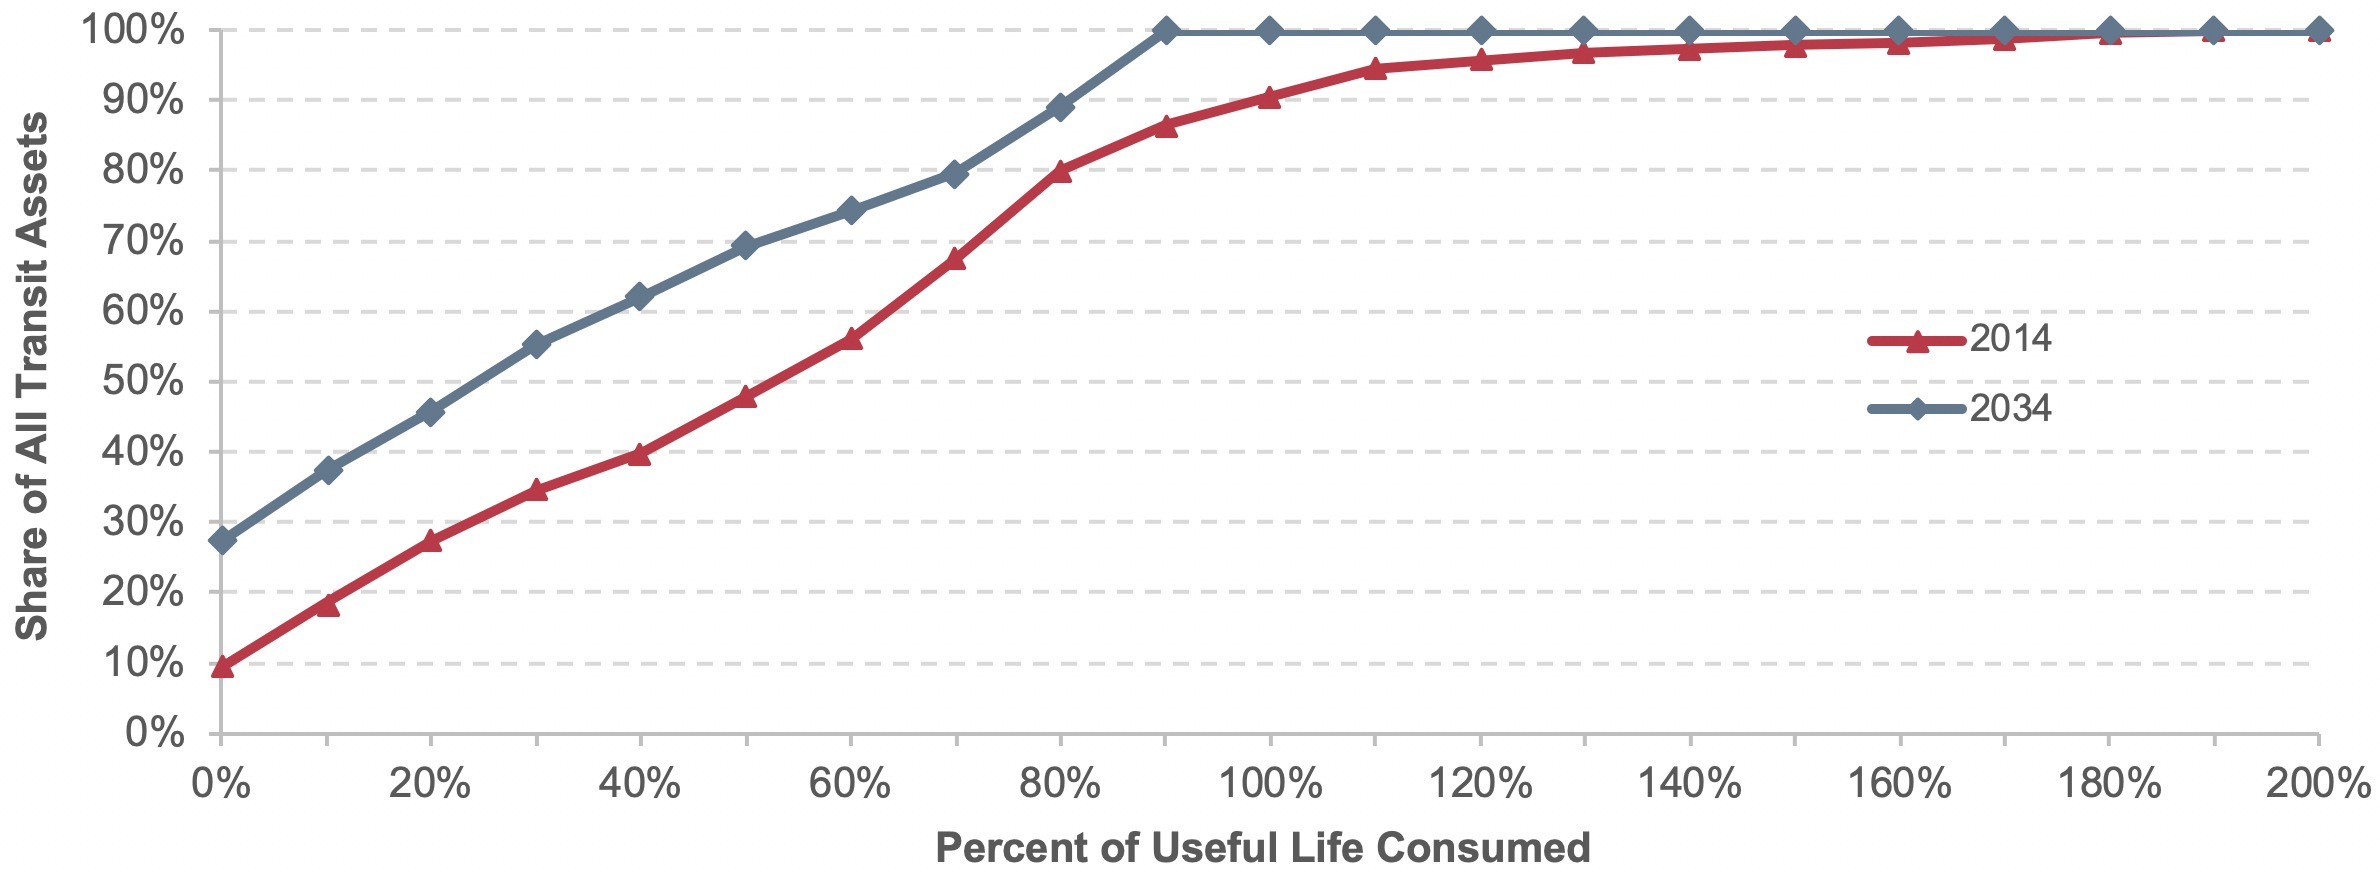 A line graph plots values for share of all transit assets in percent over percent of useful life consumed for the year 2014 and the year 2034.  The plot for the year 2014 has an initial value of 9 percent of all assets at 0 percent of useful life consumed, increases to a value of 91 percent of all assets at 100 percent useful life consumed, and tapers off to a value of 100 percent of all assets at 200 percent of useful life consumed.  The plot for the year 2034 has an initial value of 27 percent of all assets for 0 percent of useful life consumed, steadily increases to a value of 100 percent of all assets at 90 percent useful life consumed, and remains at a value of 100 percent of all assets through 200 percent of useful life consumed.  Source:  Transit Economic Requirements Model.